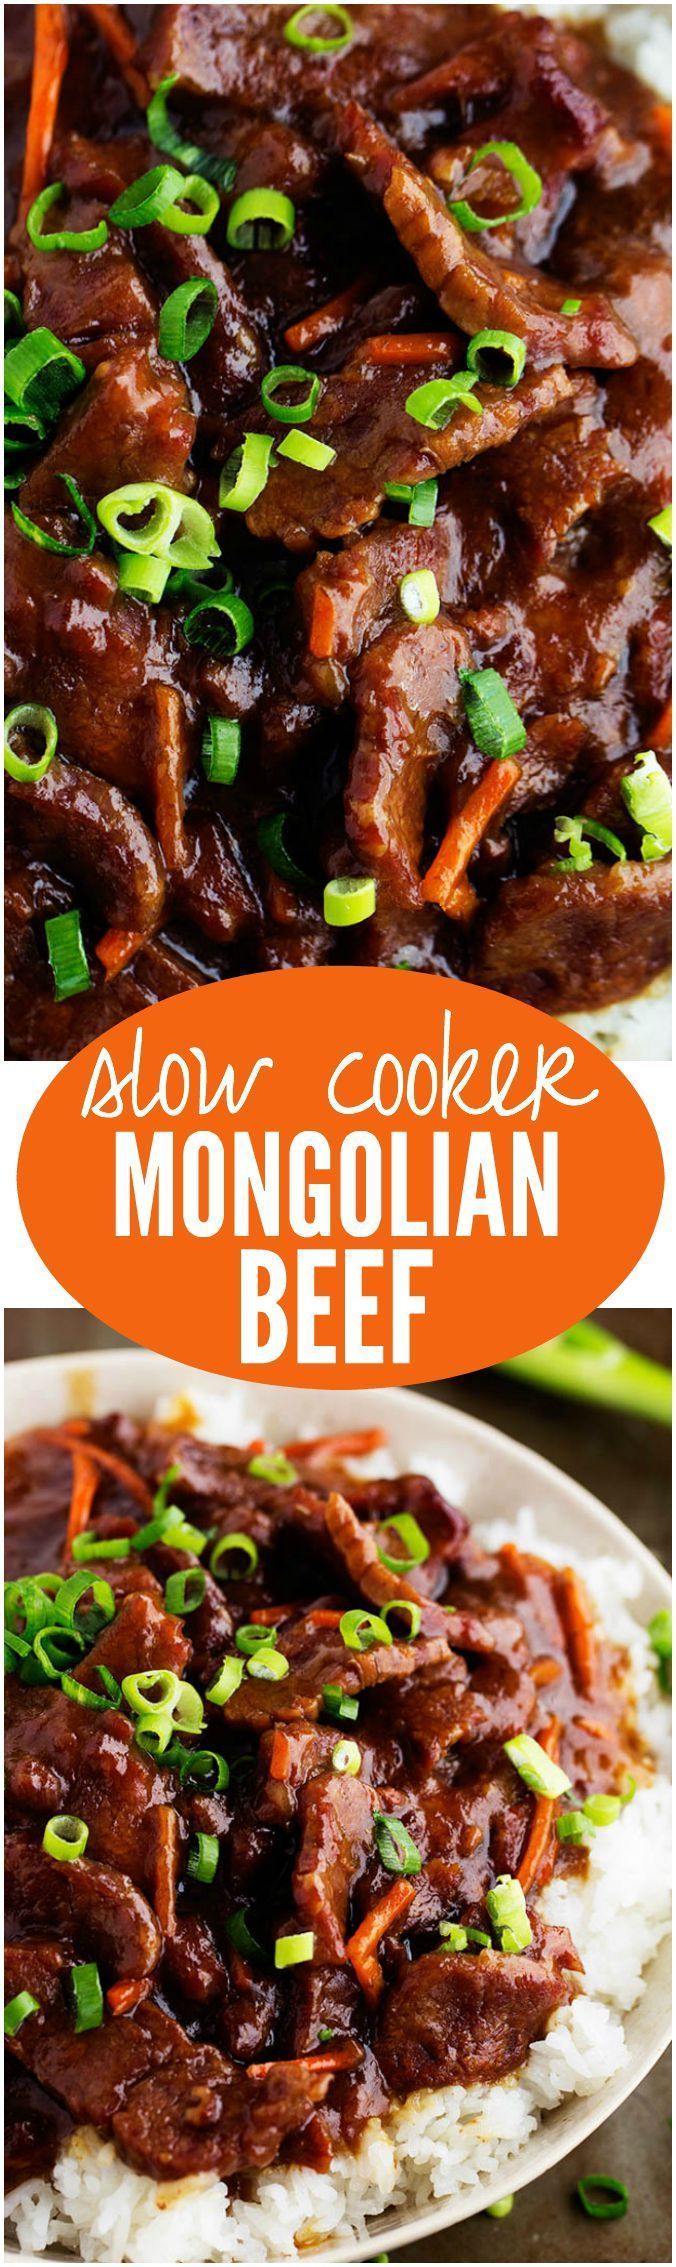 This Slow Cooker Mongolian Beef is melt in your mouth tender and has AMAZING flavor! One of the best and easiest things you will